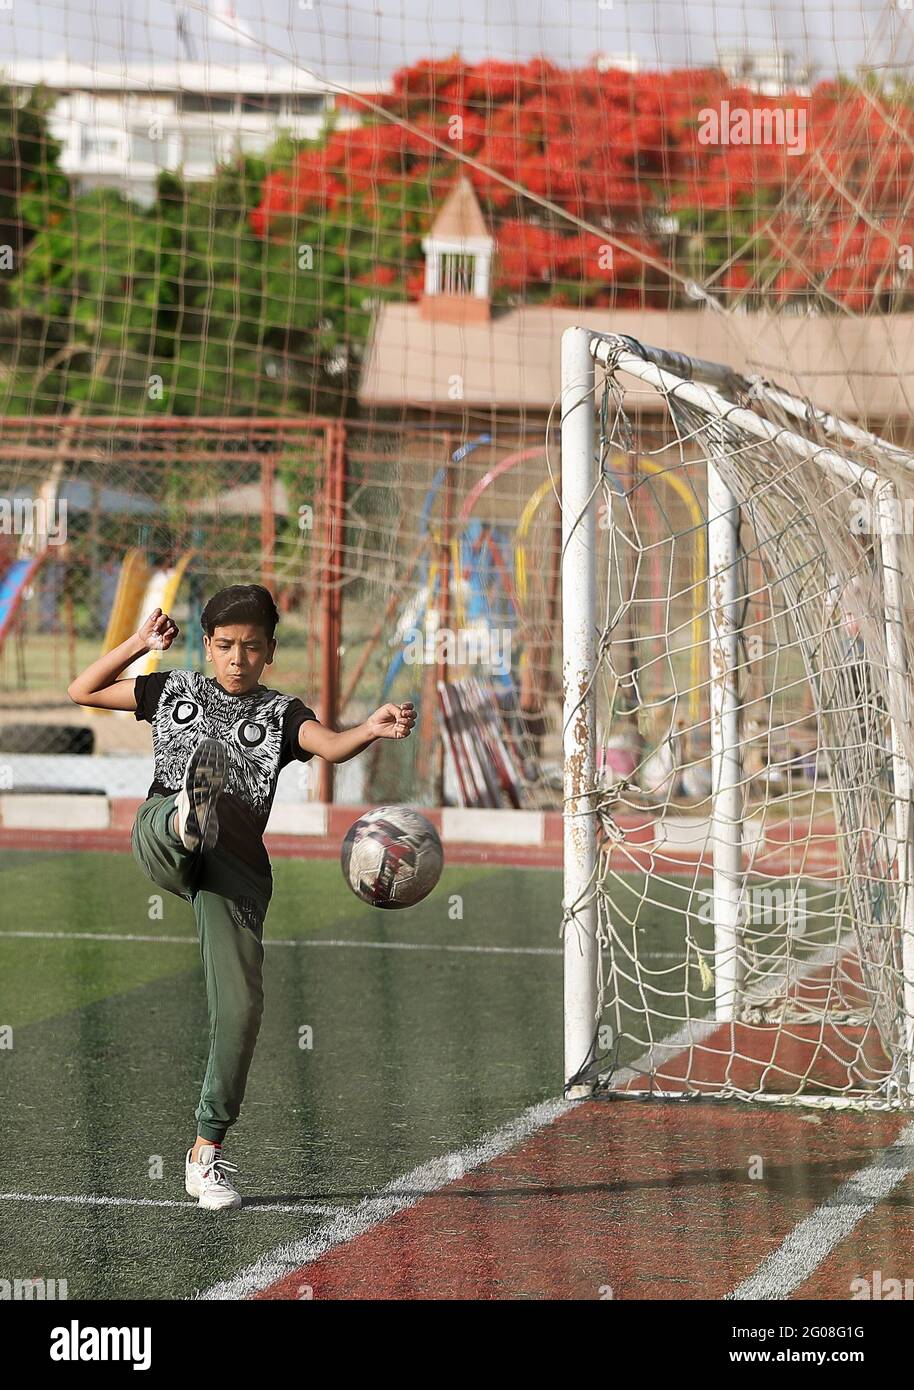 Cairo, Egypt. 1st June, 2021. A trainee participates in a football training program conducted by Manchester United Sports Academy of Egypt at the Maadi Island Park of Cairo, Egypt, June 1, 2021. Manchester United Sports Academy of Egypt aims to teach local children football skills through international training programs and qualify them for admission to professional football clubs. Credit: Wang Dongzhen/Xinhua/Alamy Live News Stock Photo